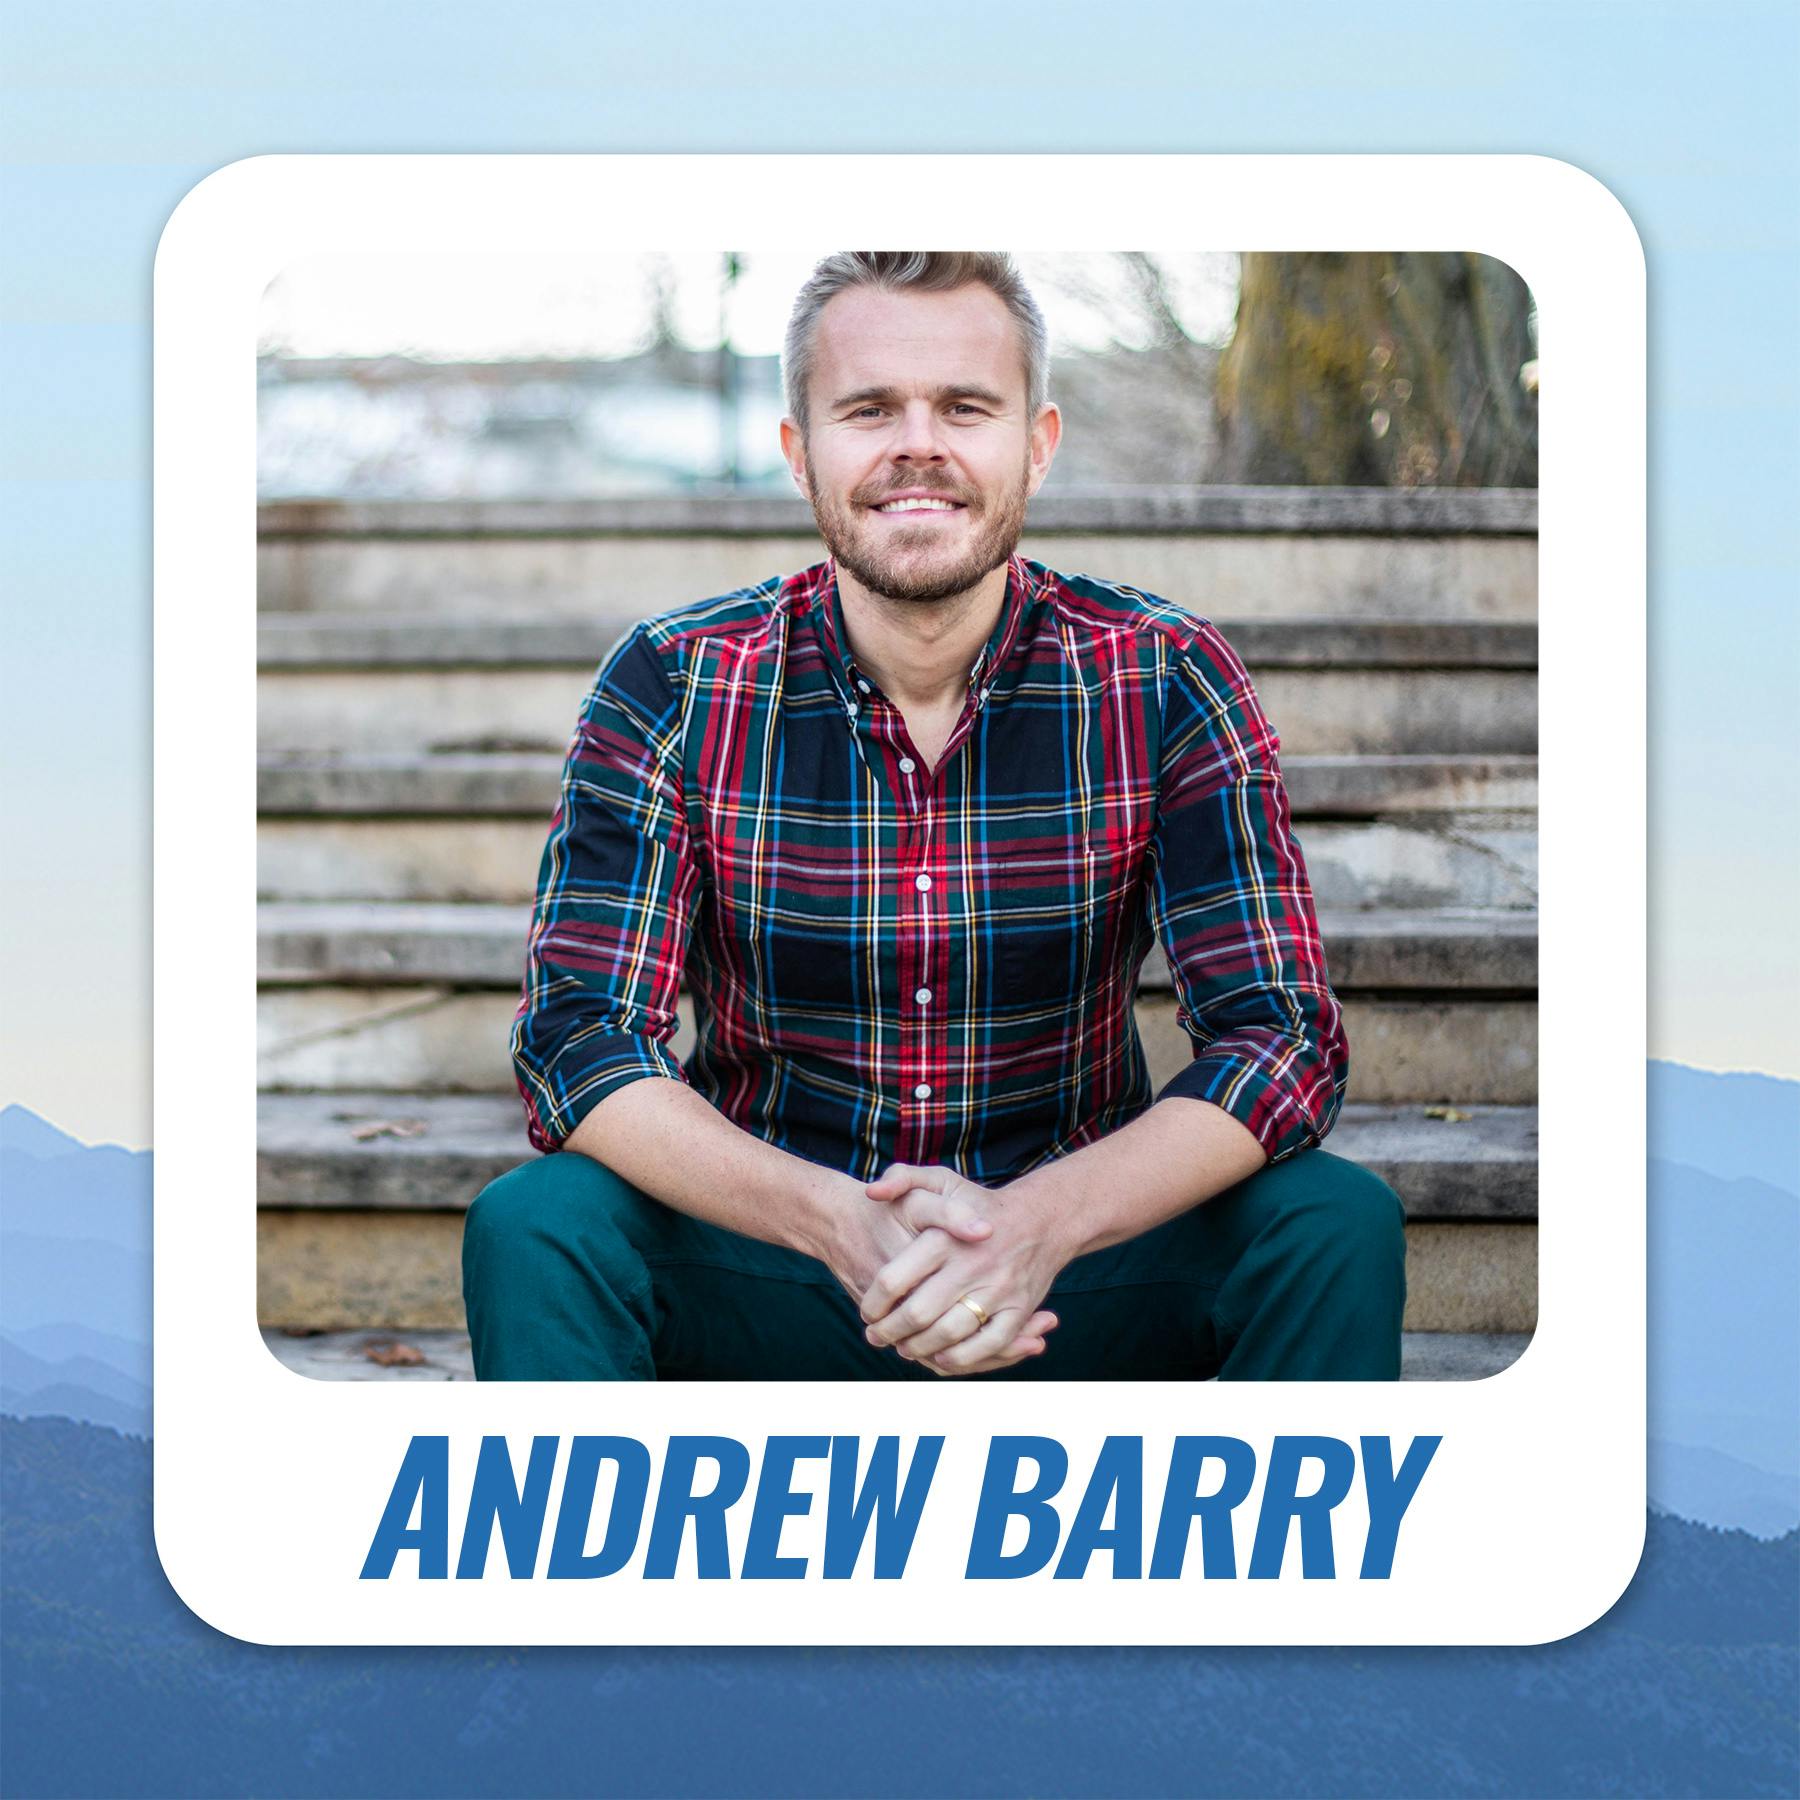 Growth and the Art of Storytelling with Andrew Barry